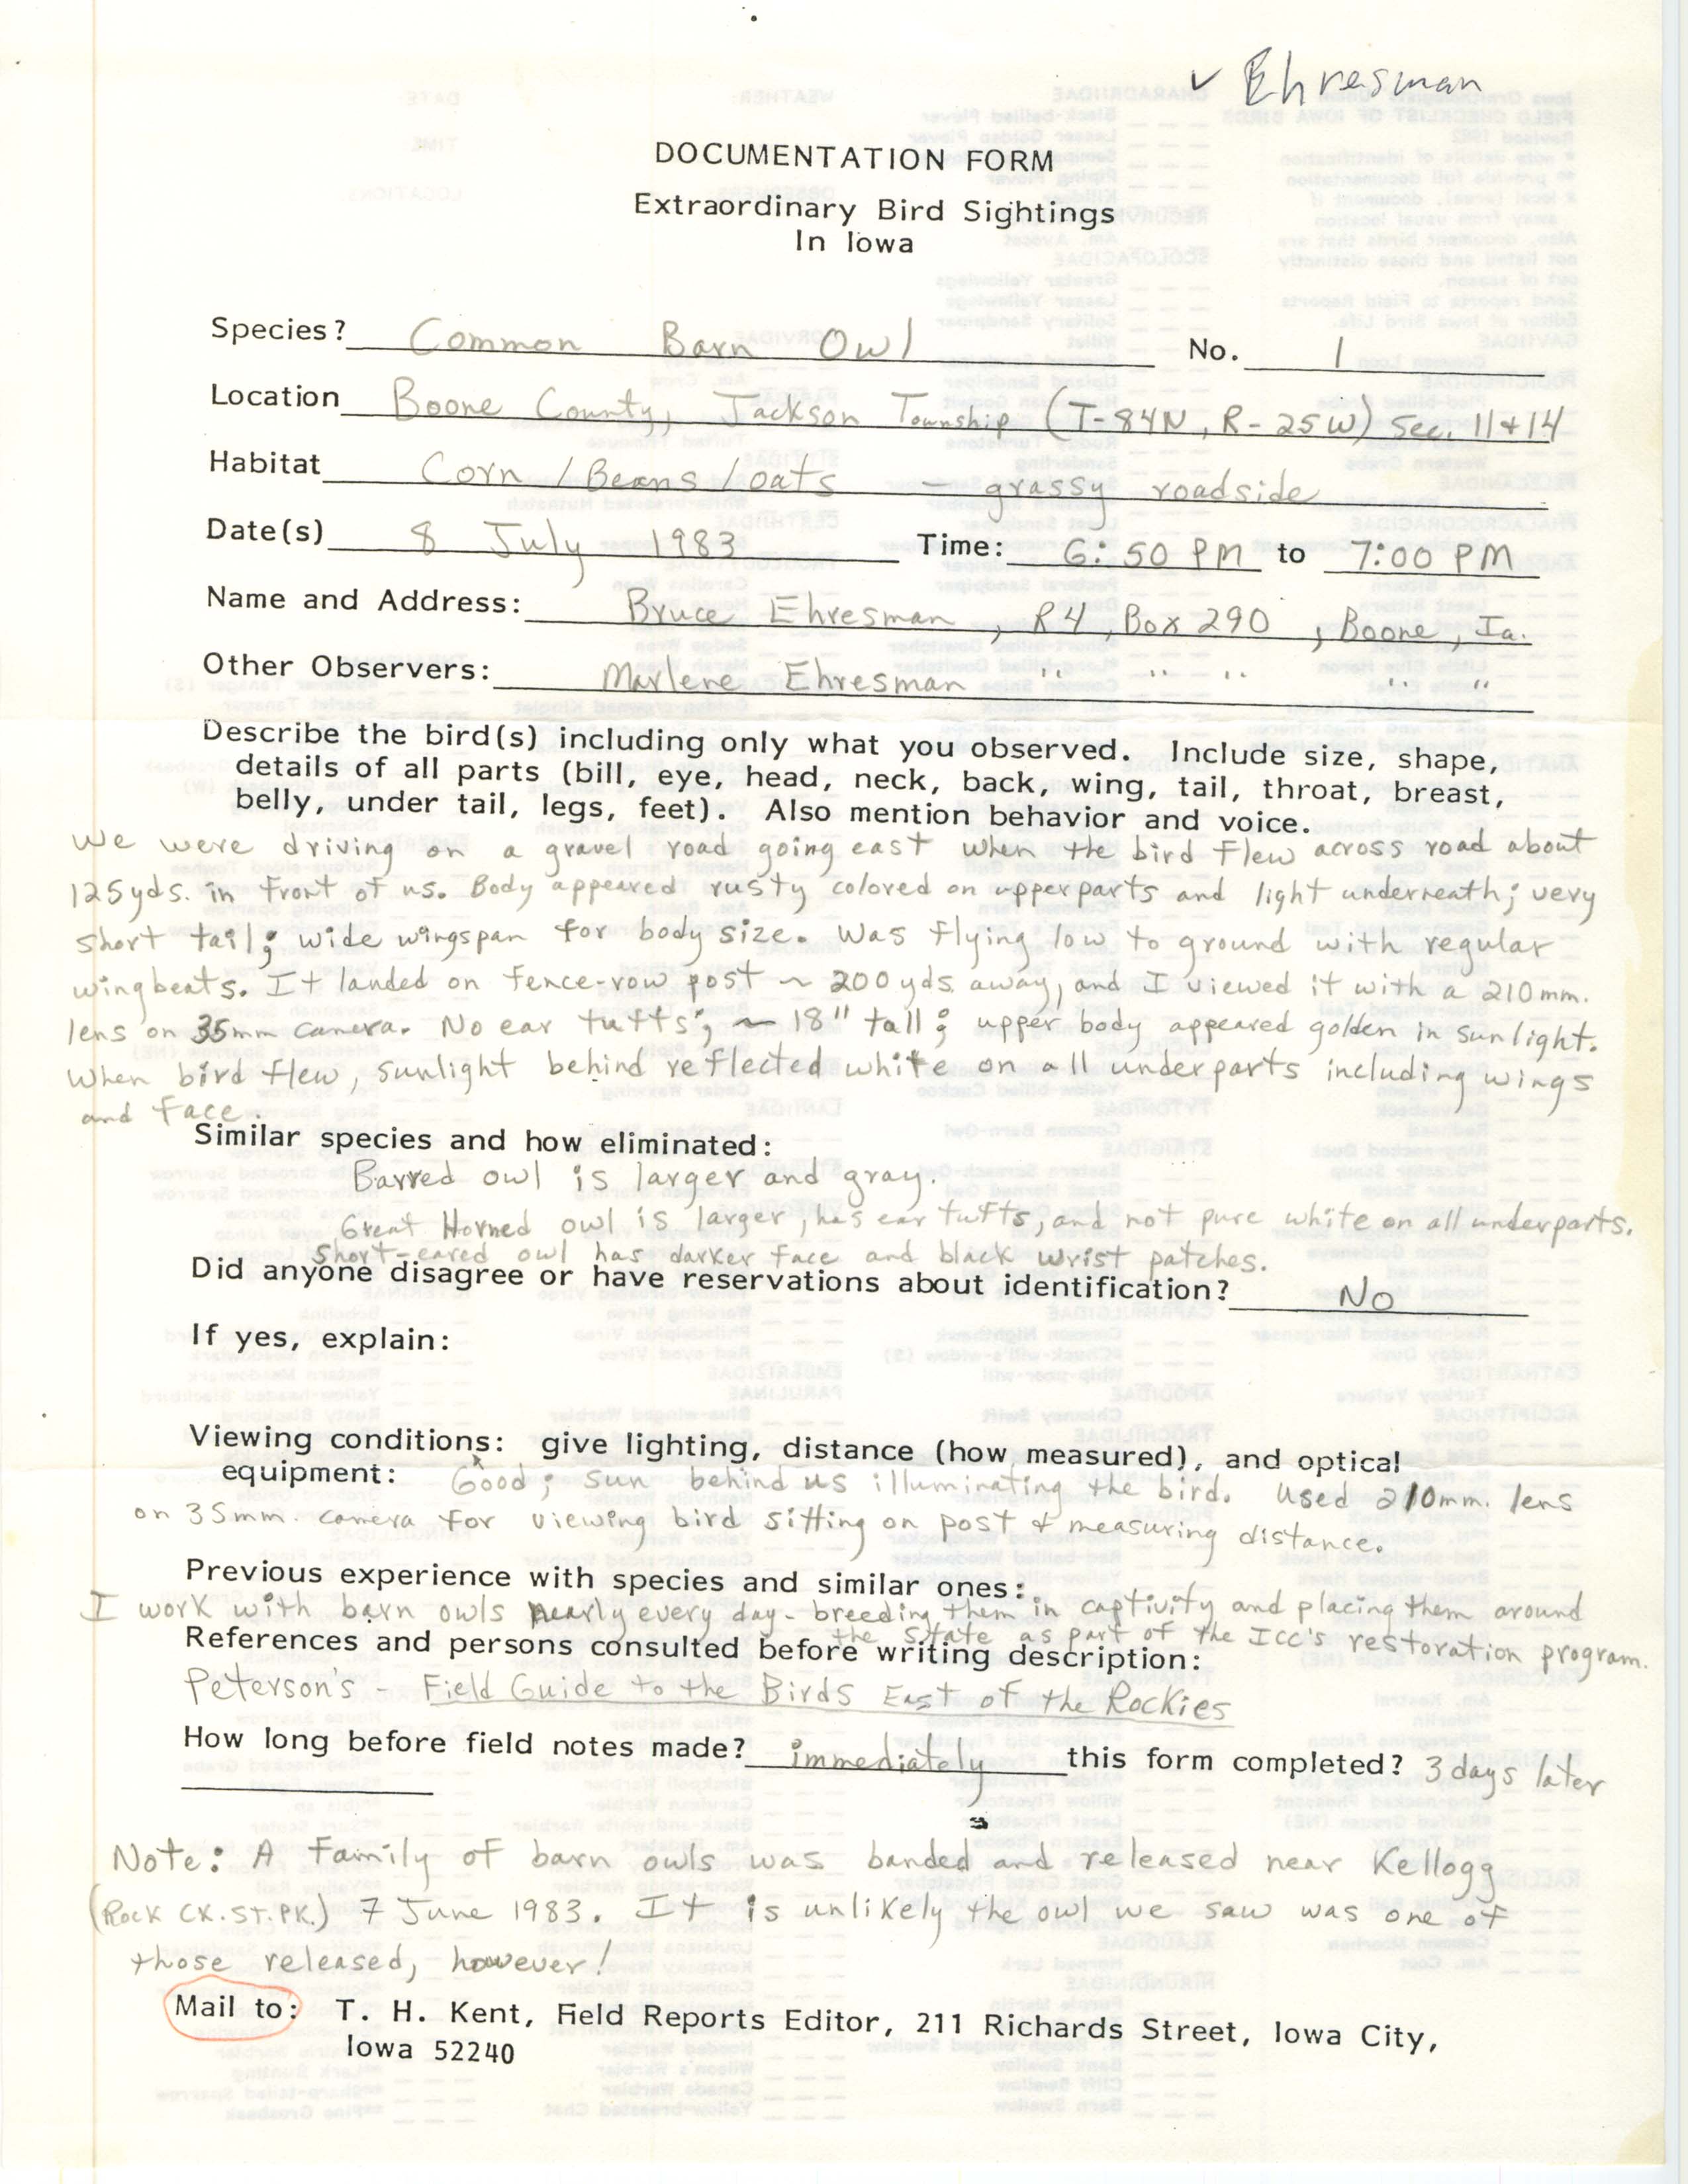 Rare bird documentation form for Common Barn Owl at Jackson Township in Boone County, 1983